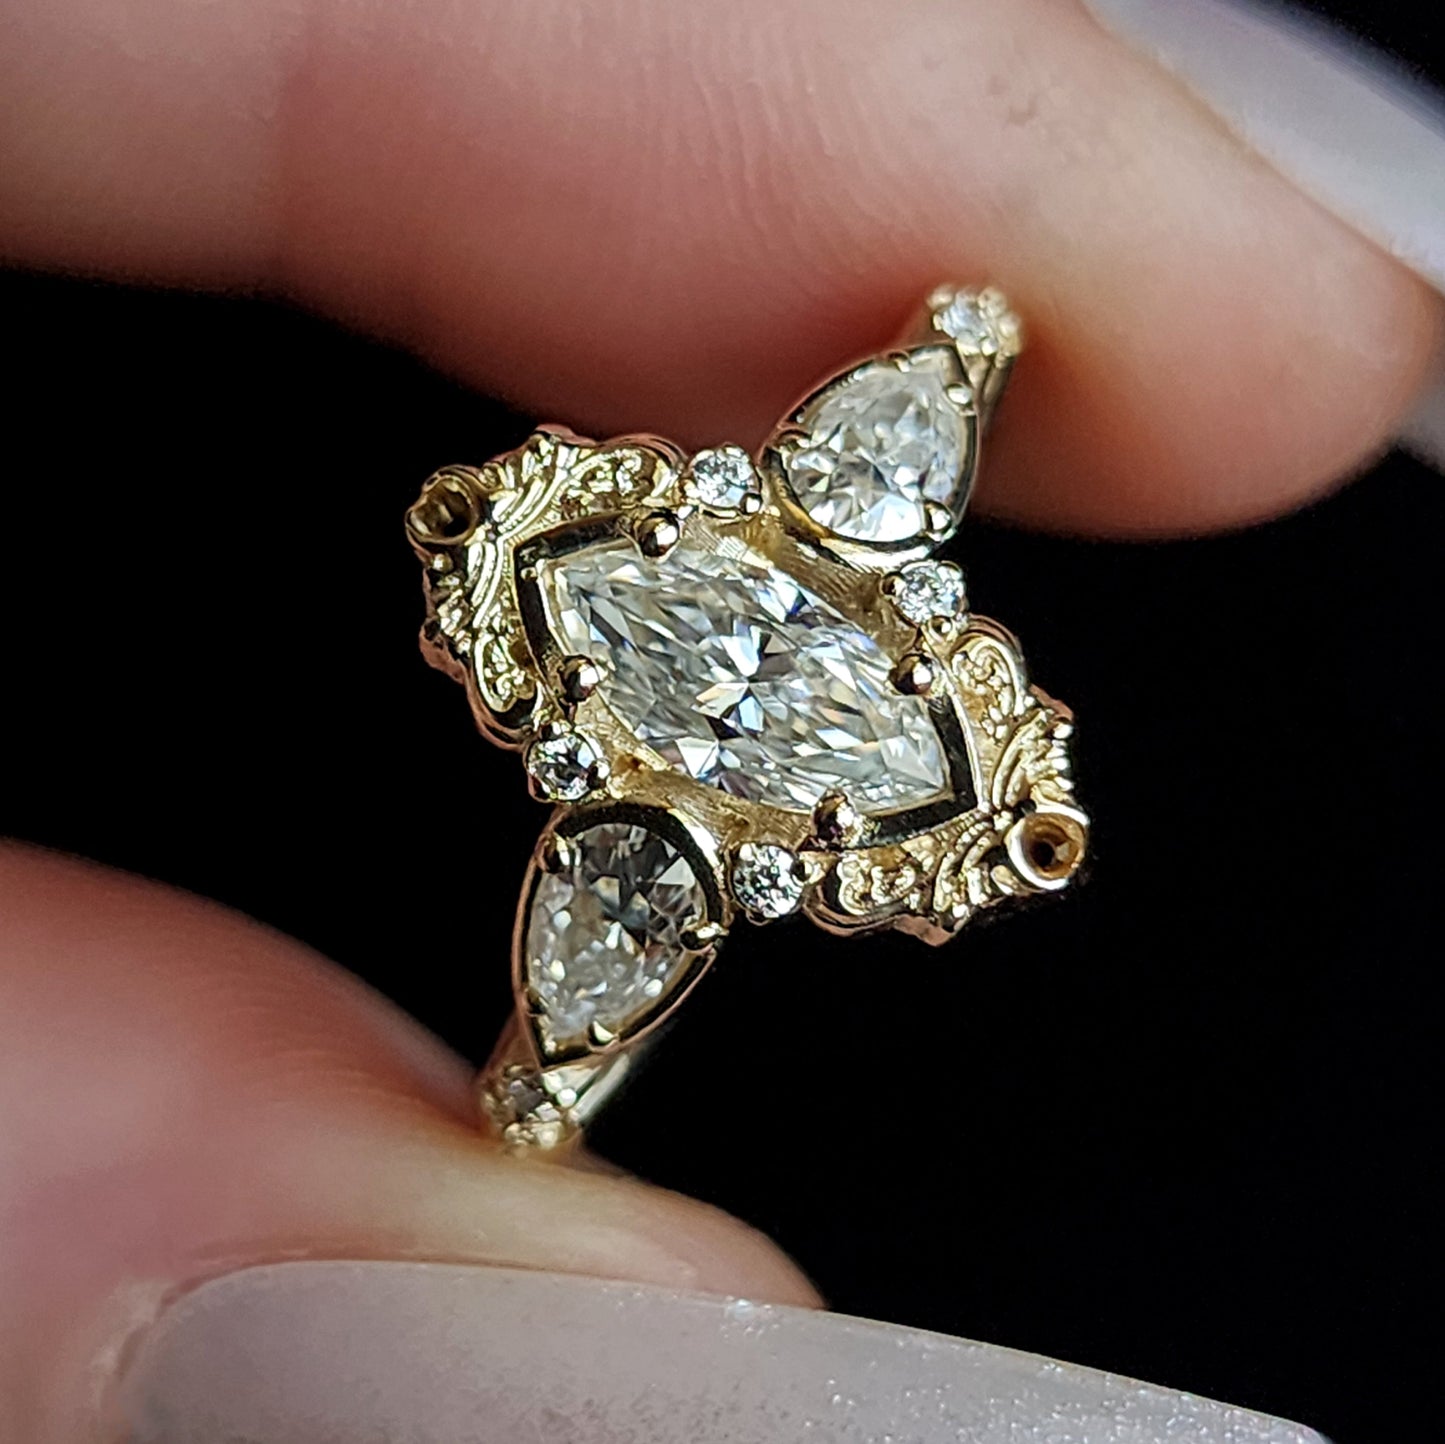 odette marquise engagement ring 14k gold fantasy jewelry